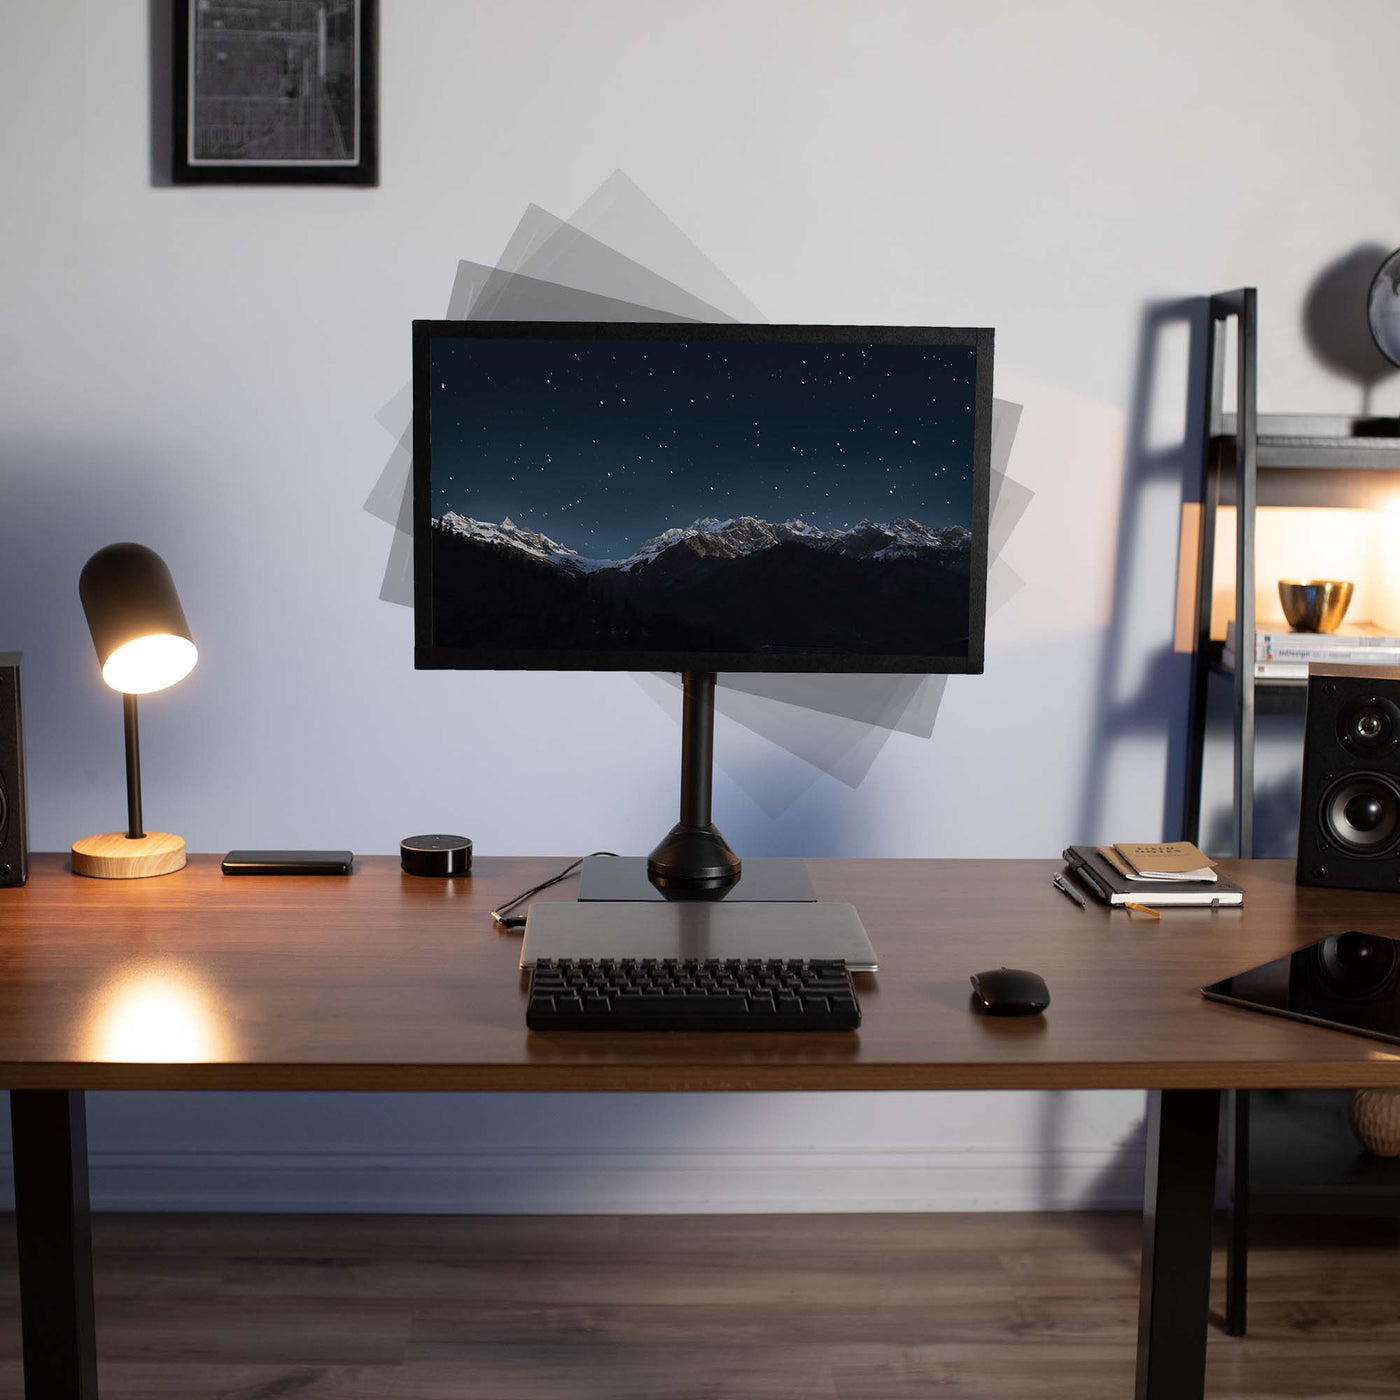 Optimize the viewing angles of your monitor with a rotating monitor stand from VIVO.